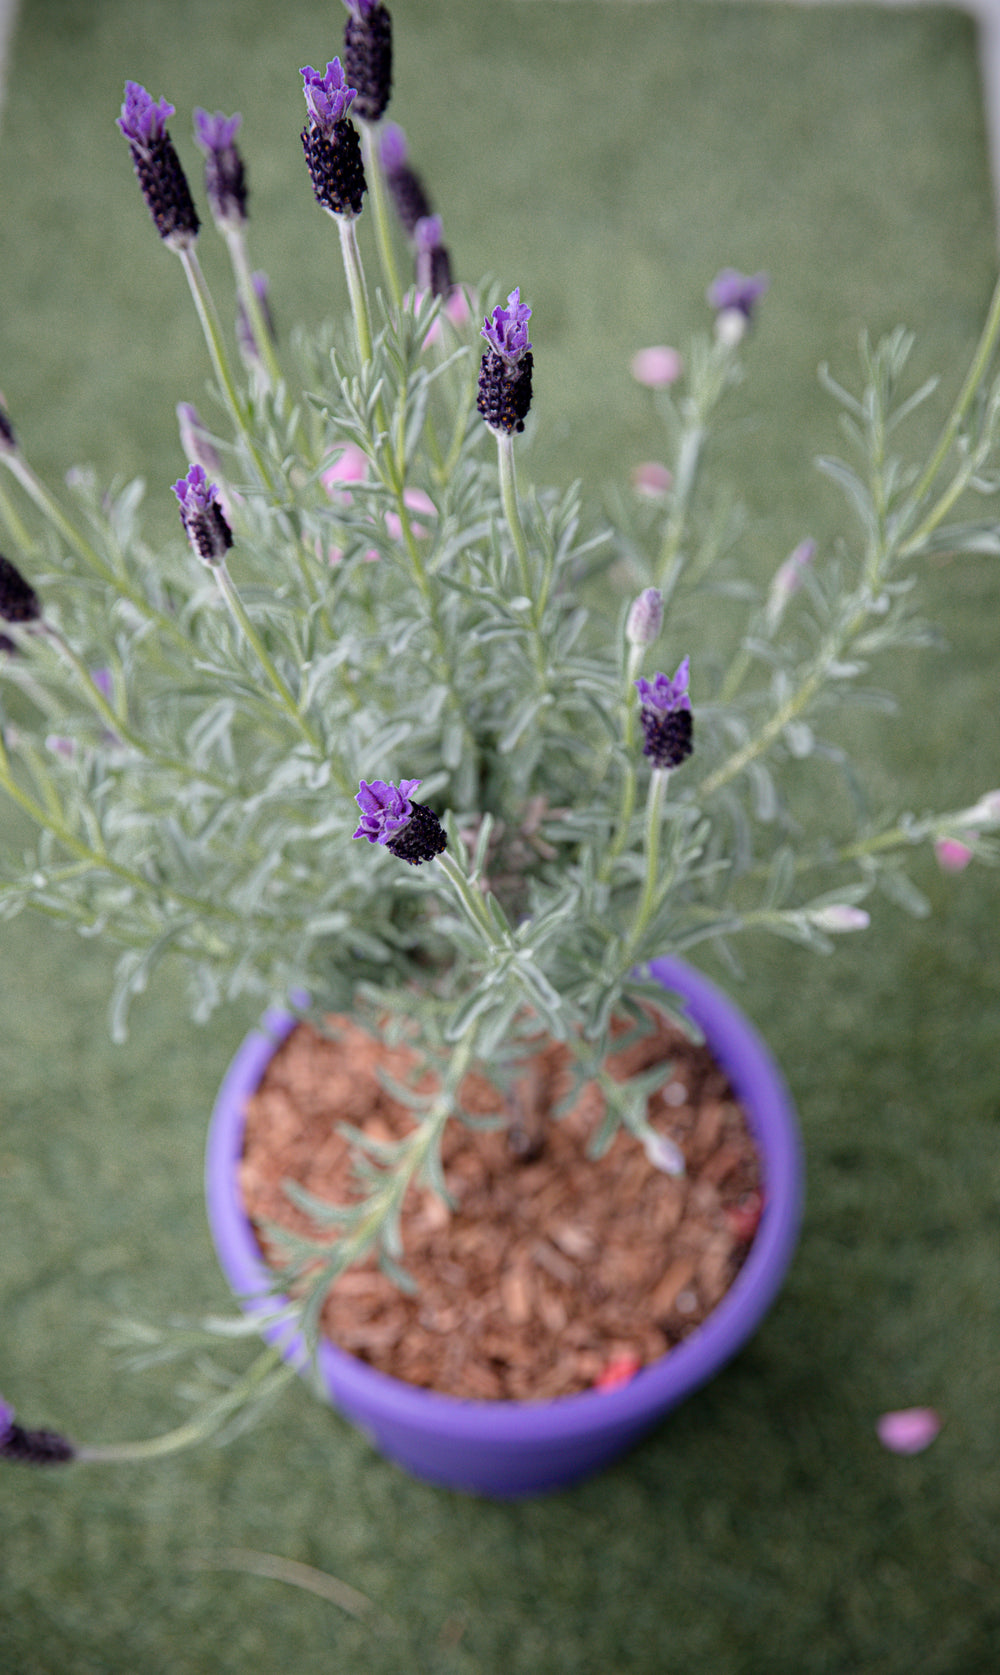 potted lavender plant in a purple pot on green grass